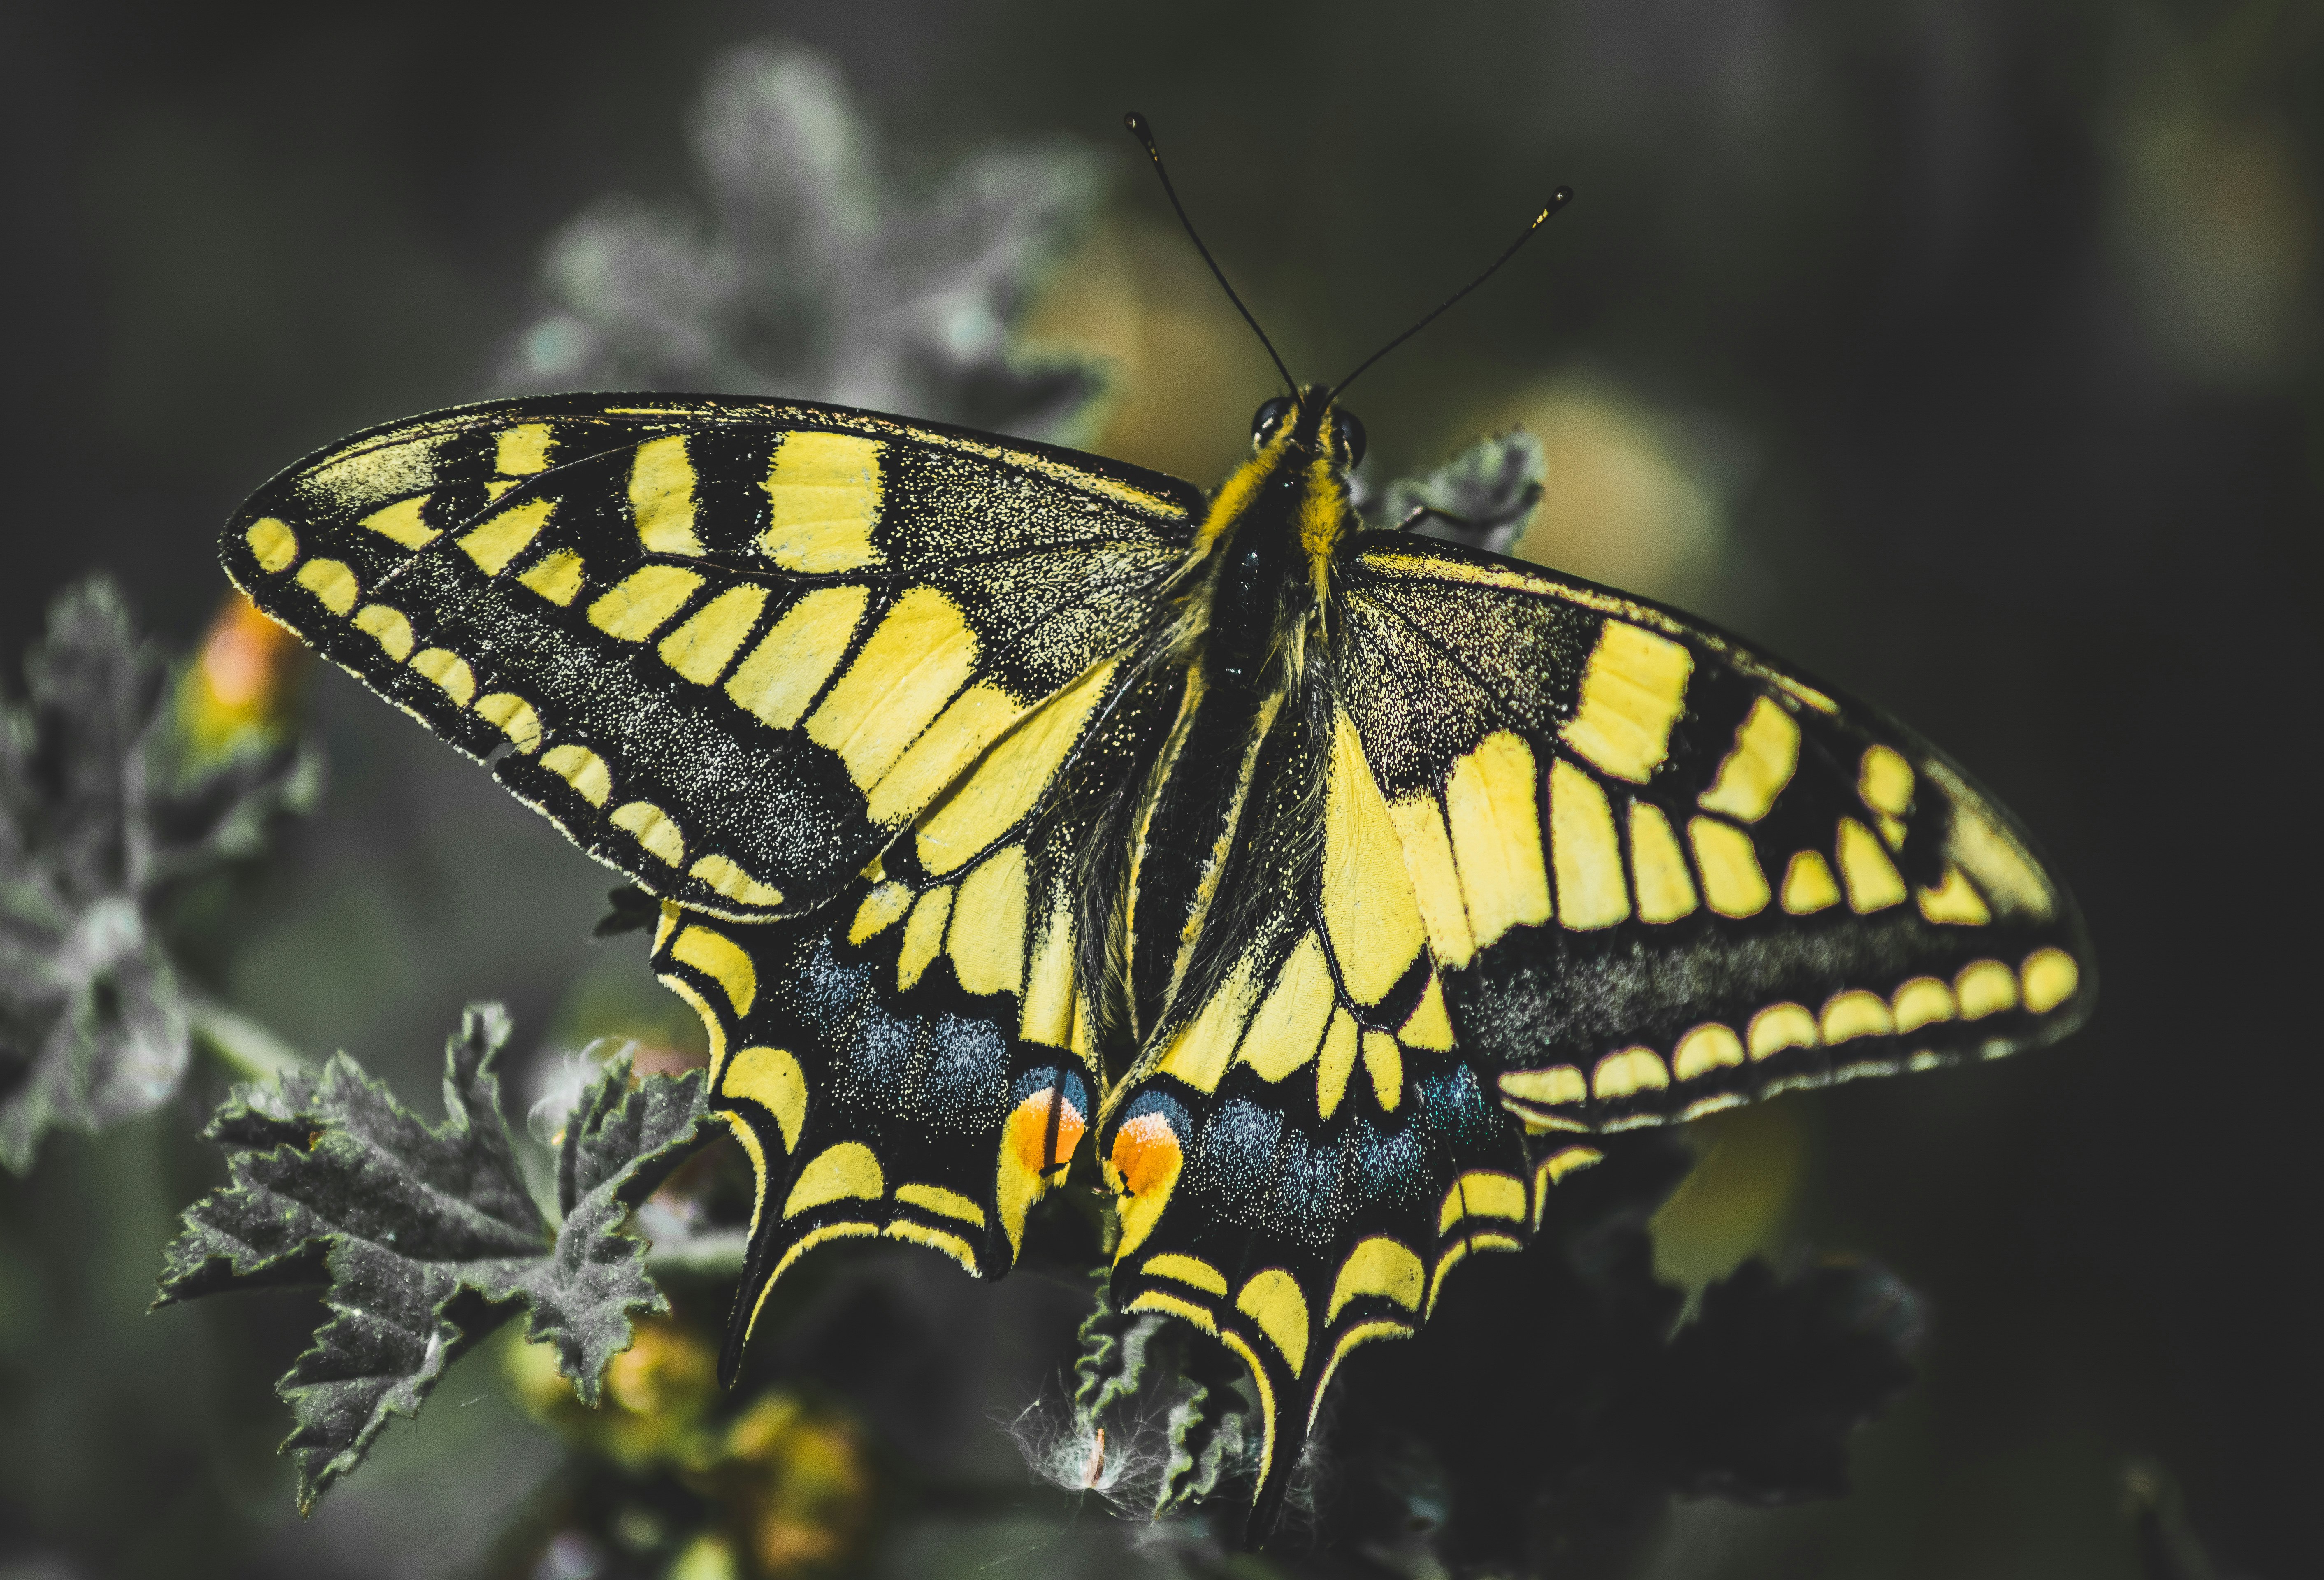 black and yellow butterfly perched on white flower in close up photography during daytime